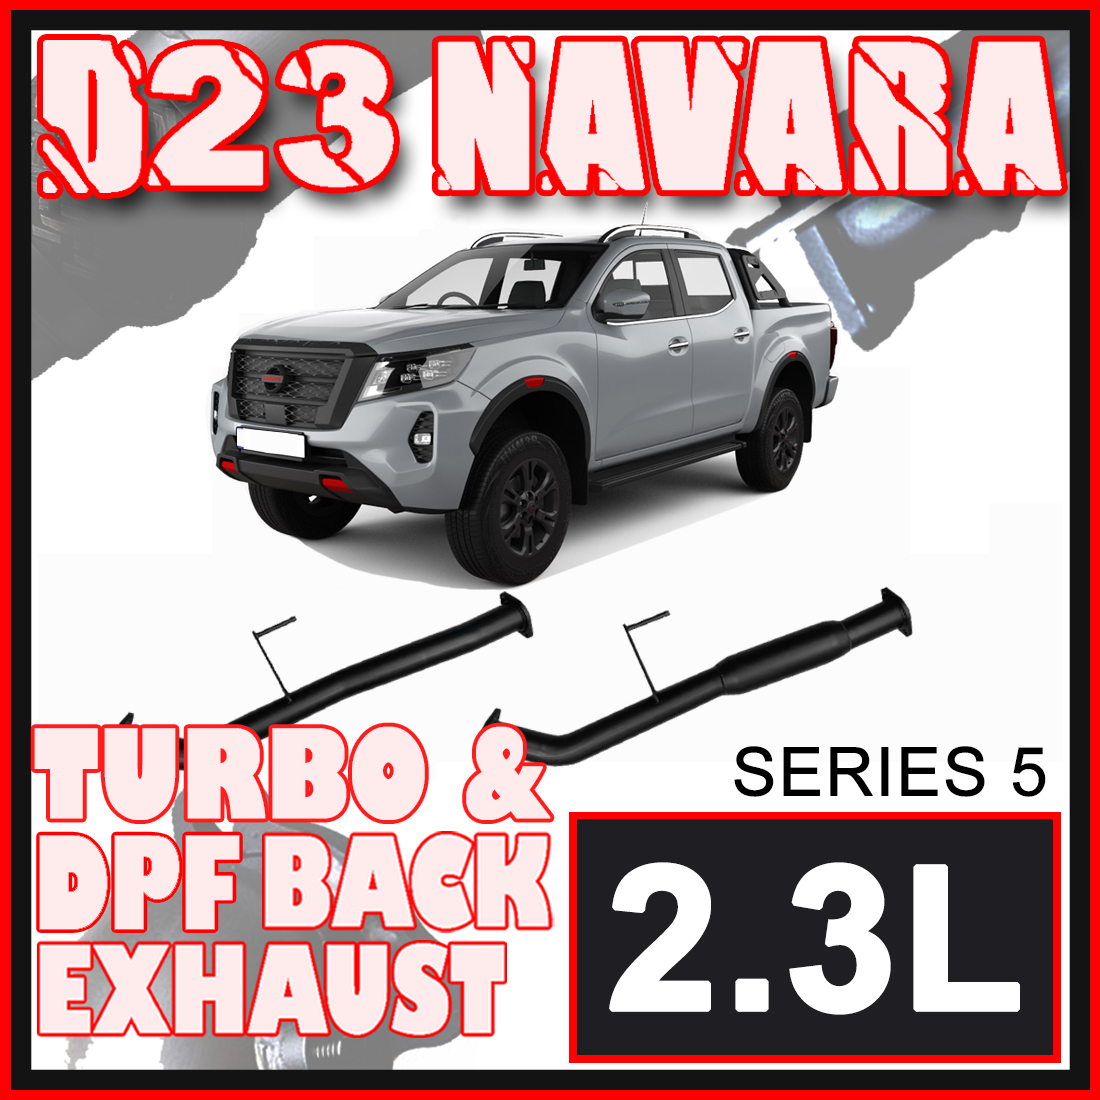 Nissan D23 Navara Exhaust Series 5 NP300 3" Systems image